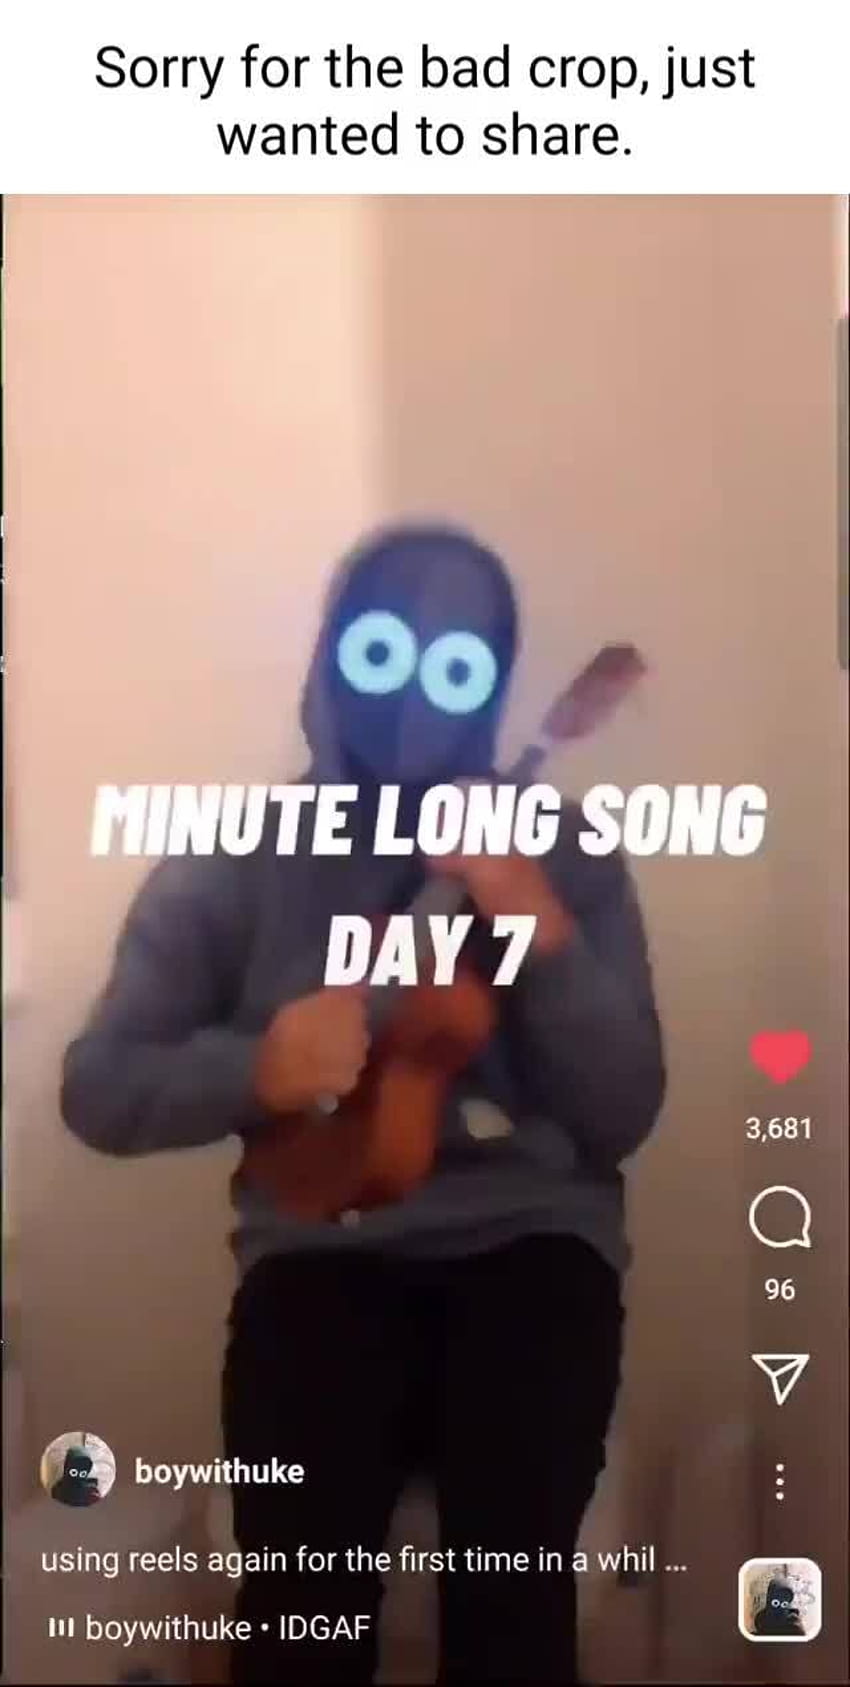 Sorry for the bad crop, just wanted to share. CO MINUTE LONG SONG 7/ 3,681 boywithuke using reels again for the first time in a whil boywithuke IDGAF HD phone wallpaper